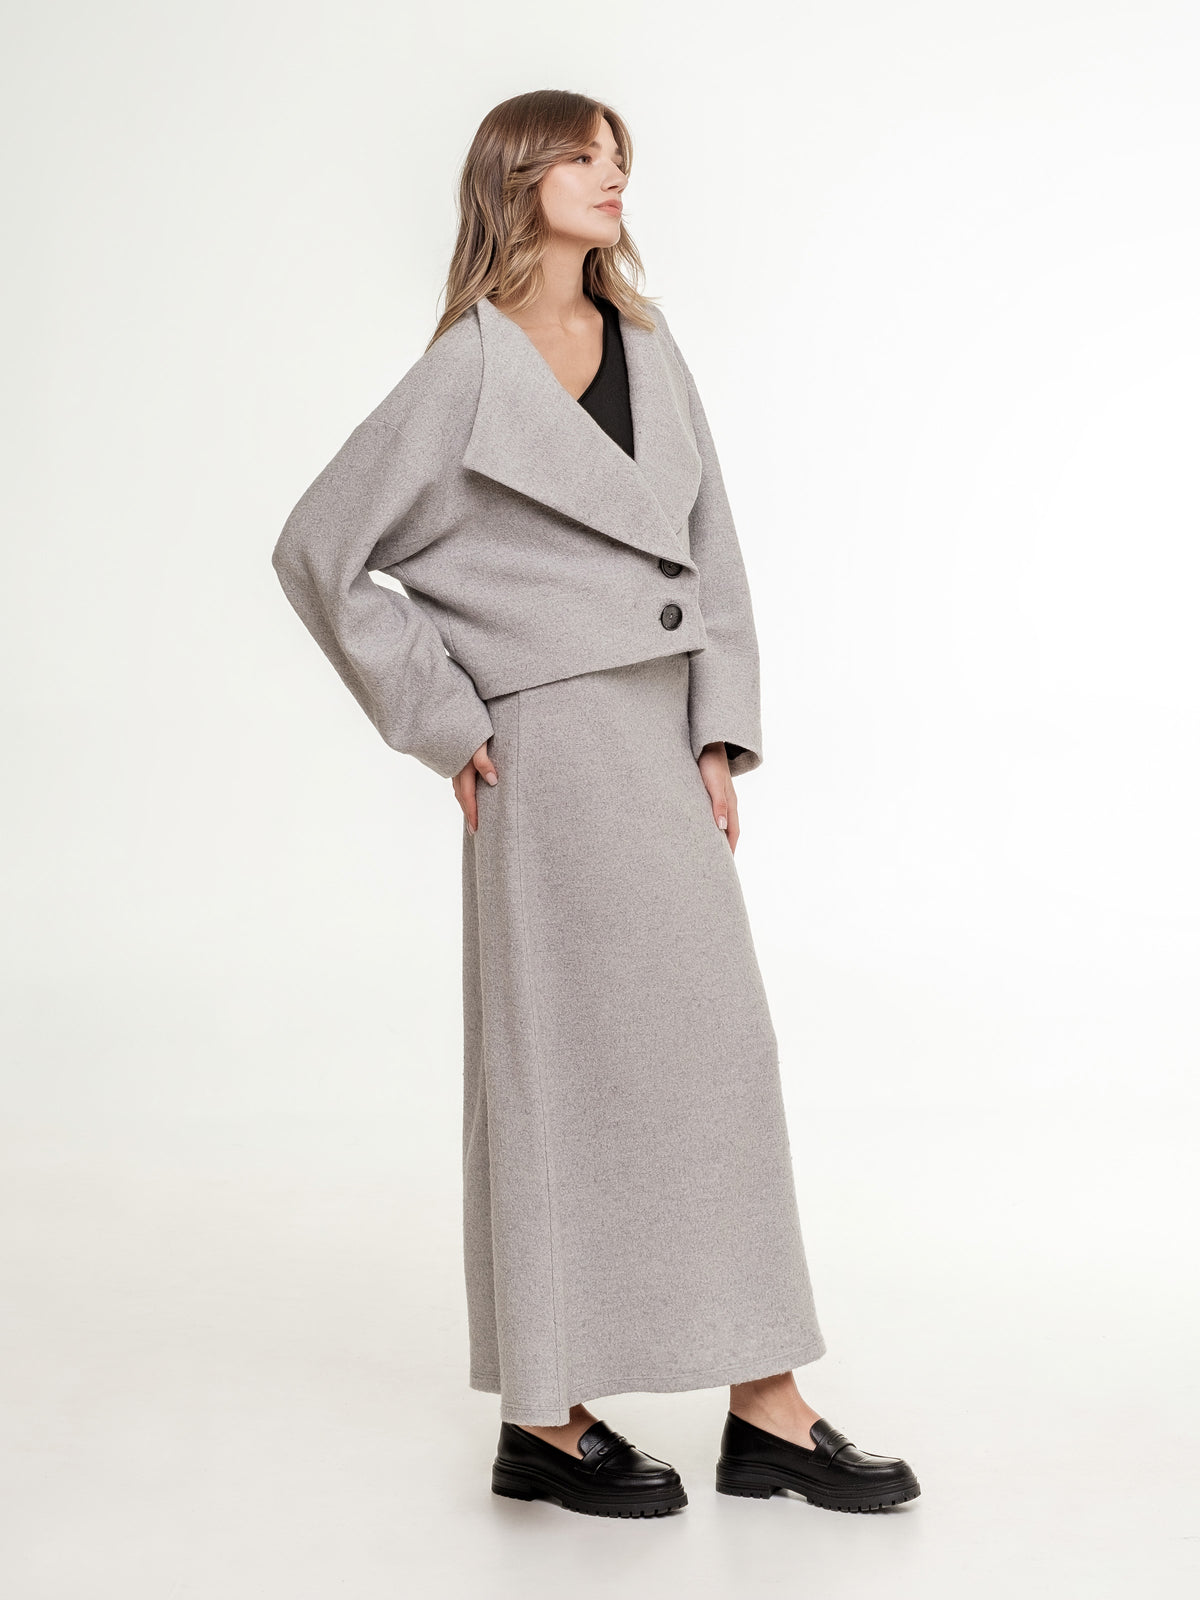 light grey wool set jacket and long skirt view from the side